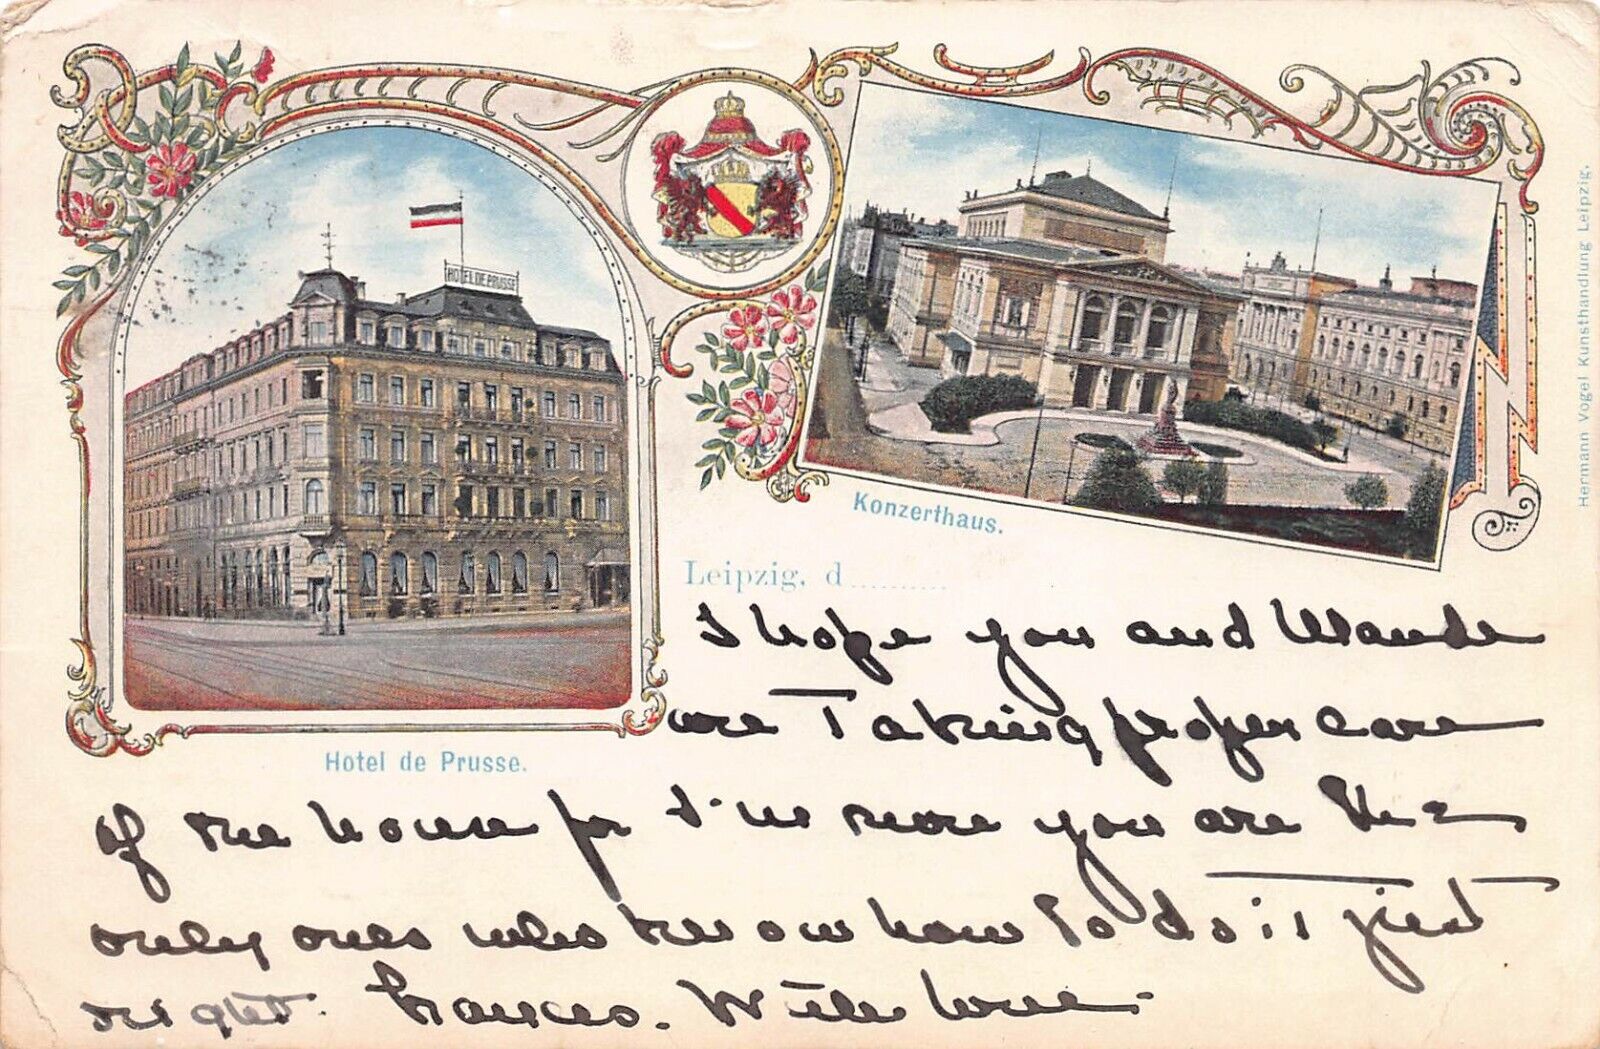 Leipzig, Germany, 2 Scenes: the Concert Hall and Prussia Hotel, 1902 postcard